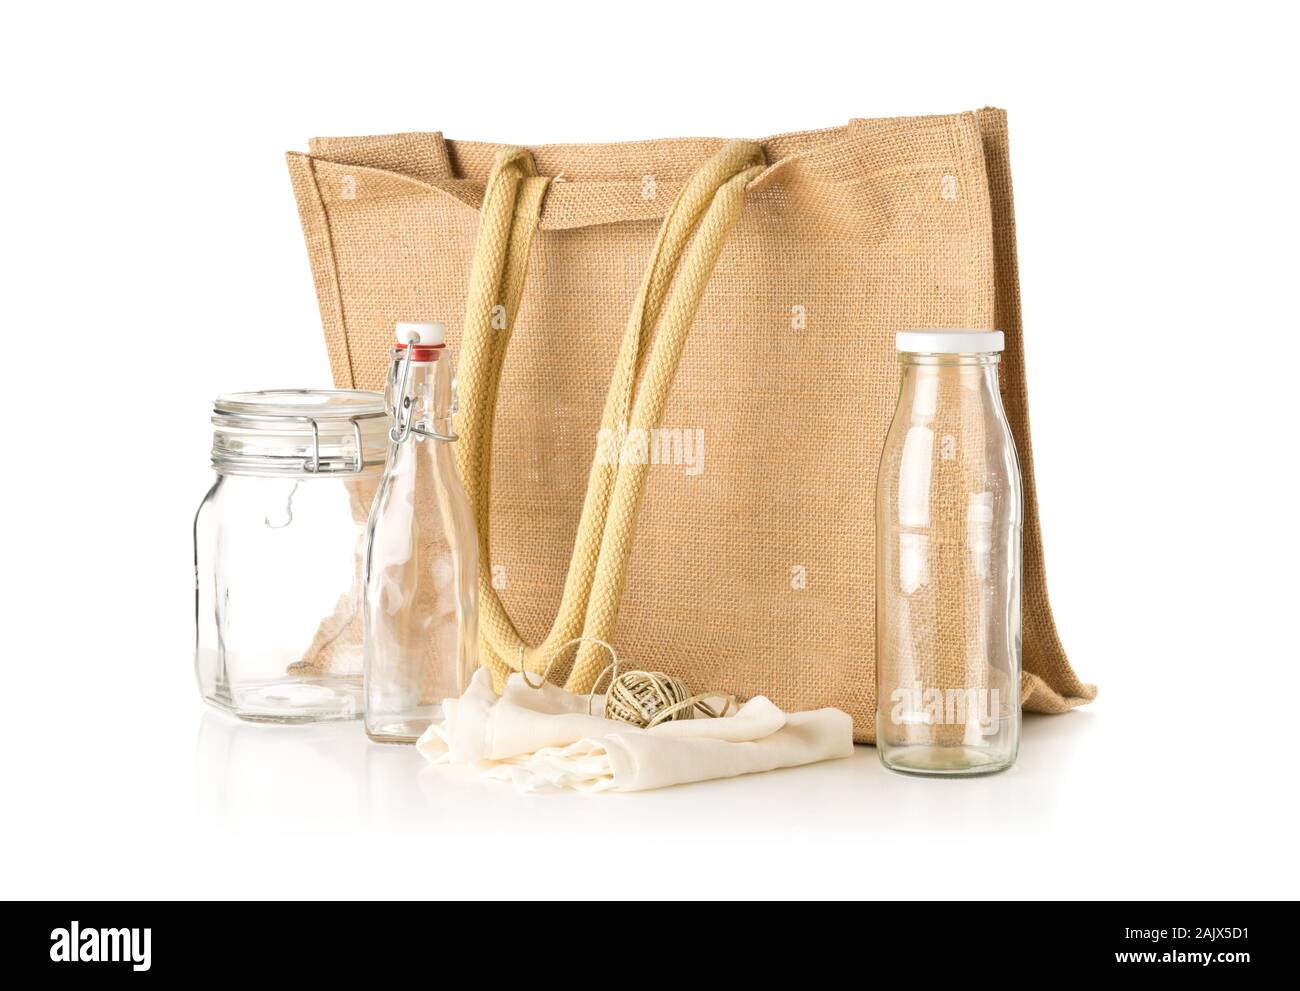 Zero waste or waste free shopping utensils with burlap bag, glass bottles and cotton bag over white background - waste reduction eco lifestyle or bulk Stock Photo